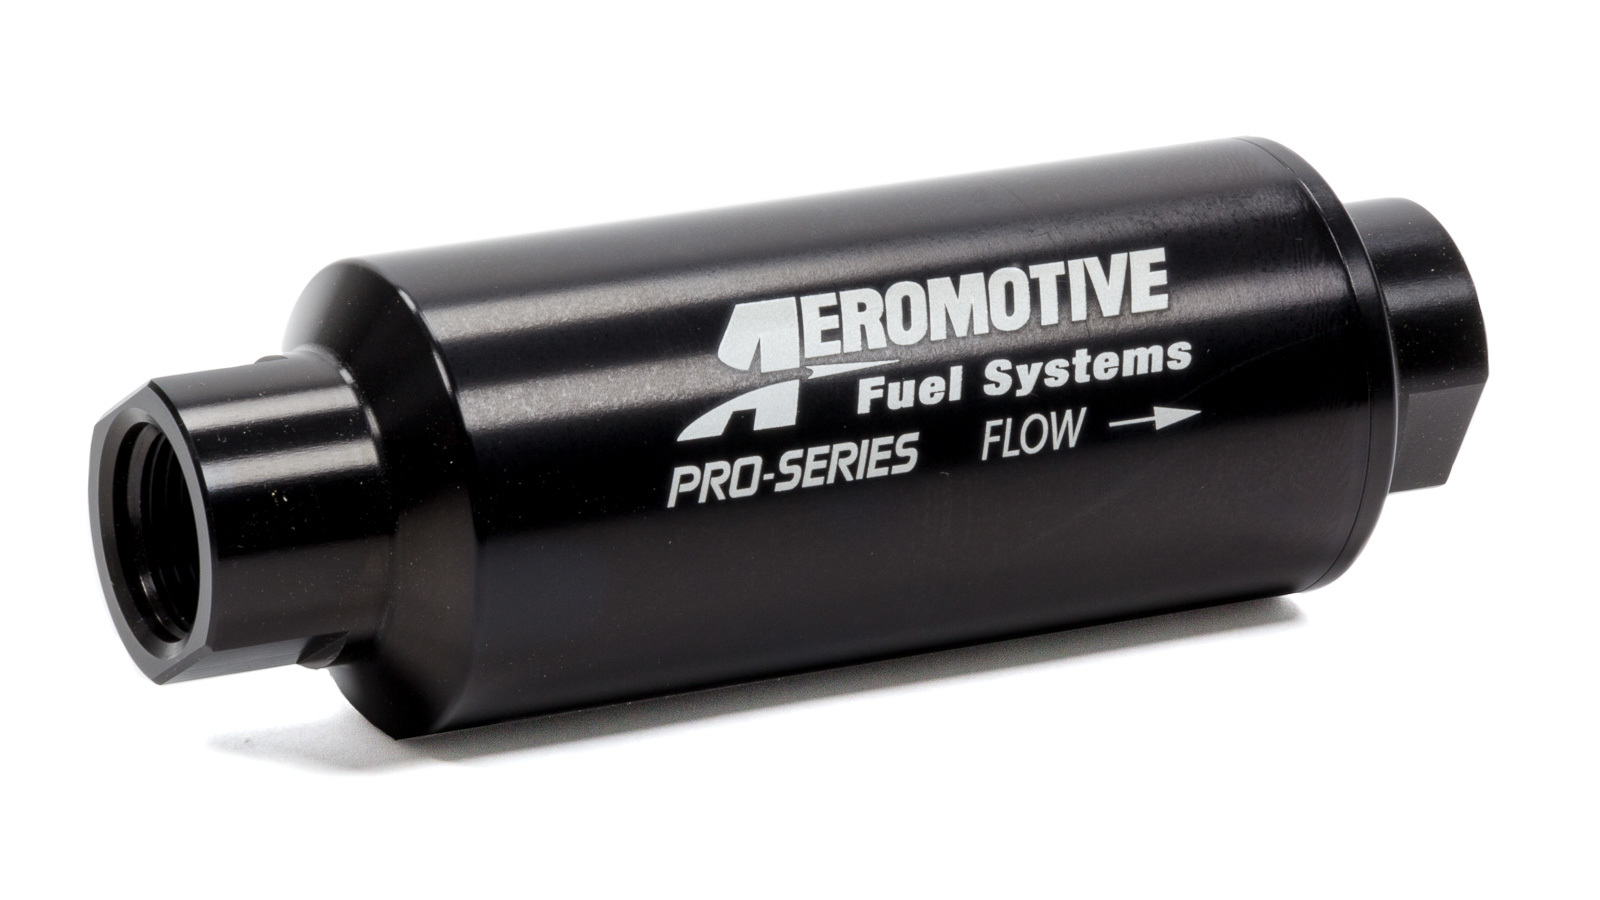 Aeromotive 12310 Fuel Filter, Pro-Series, In-Line, 10 Micron, Fabric Element, 12 AN Female O-Ring Inlet, 12 AN Female O-Ring Outlet, Aluminum, Black Anodized, Each